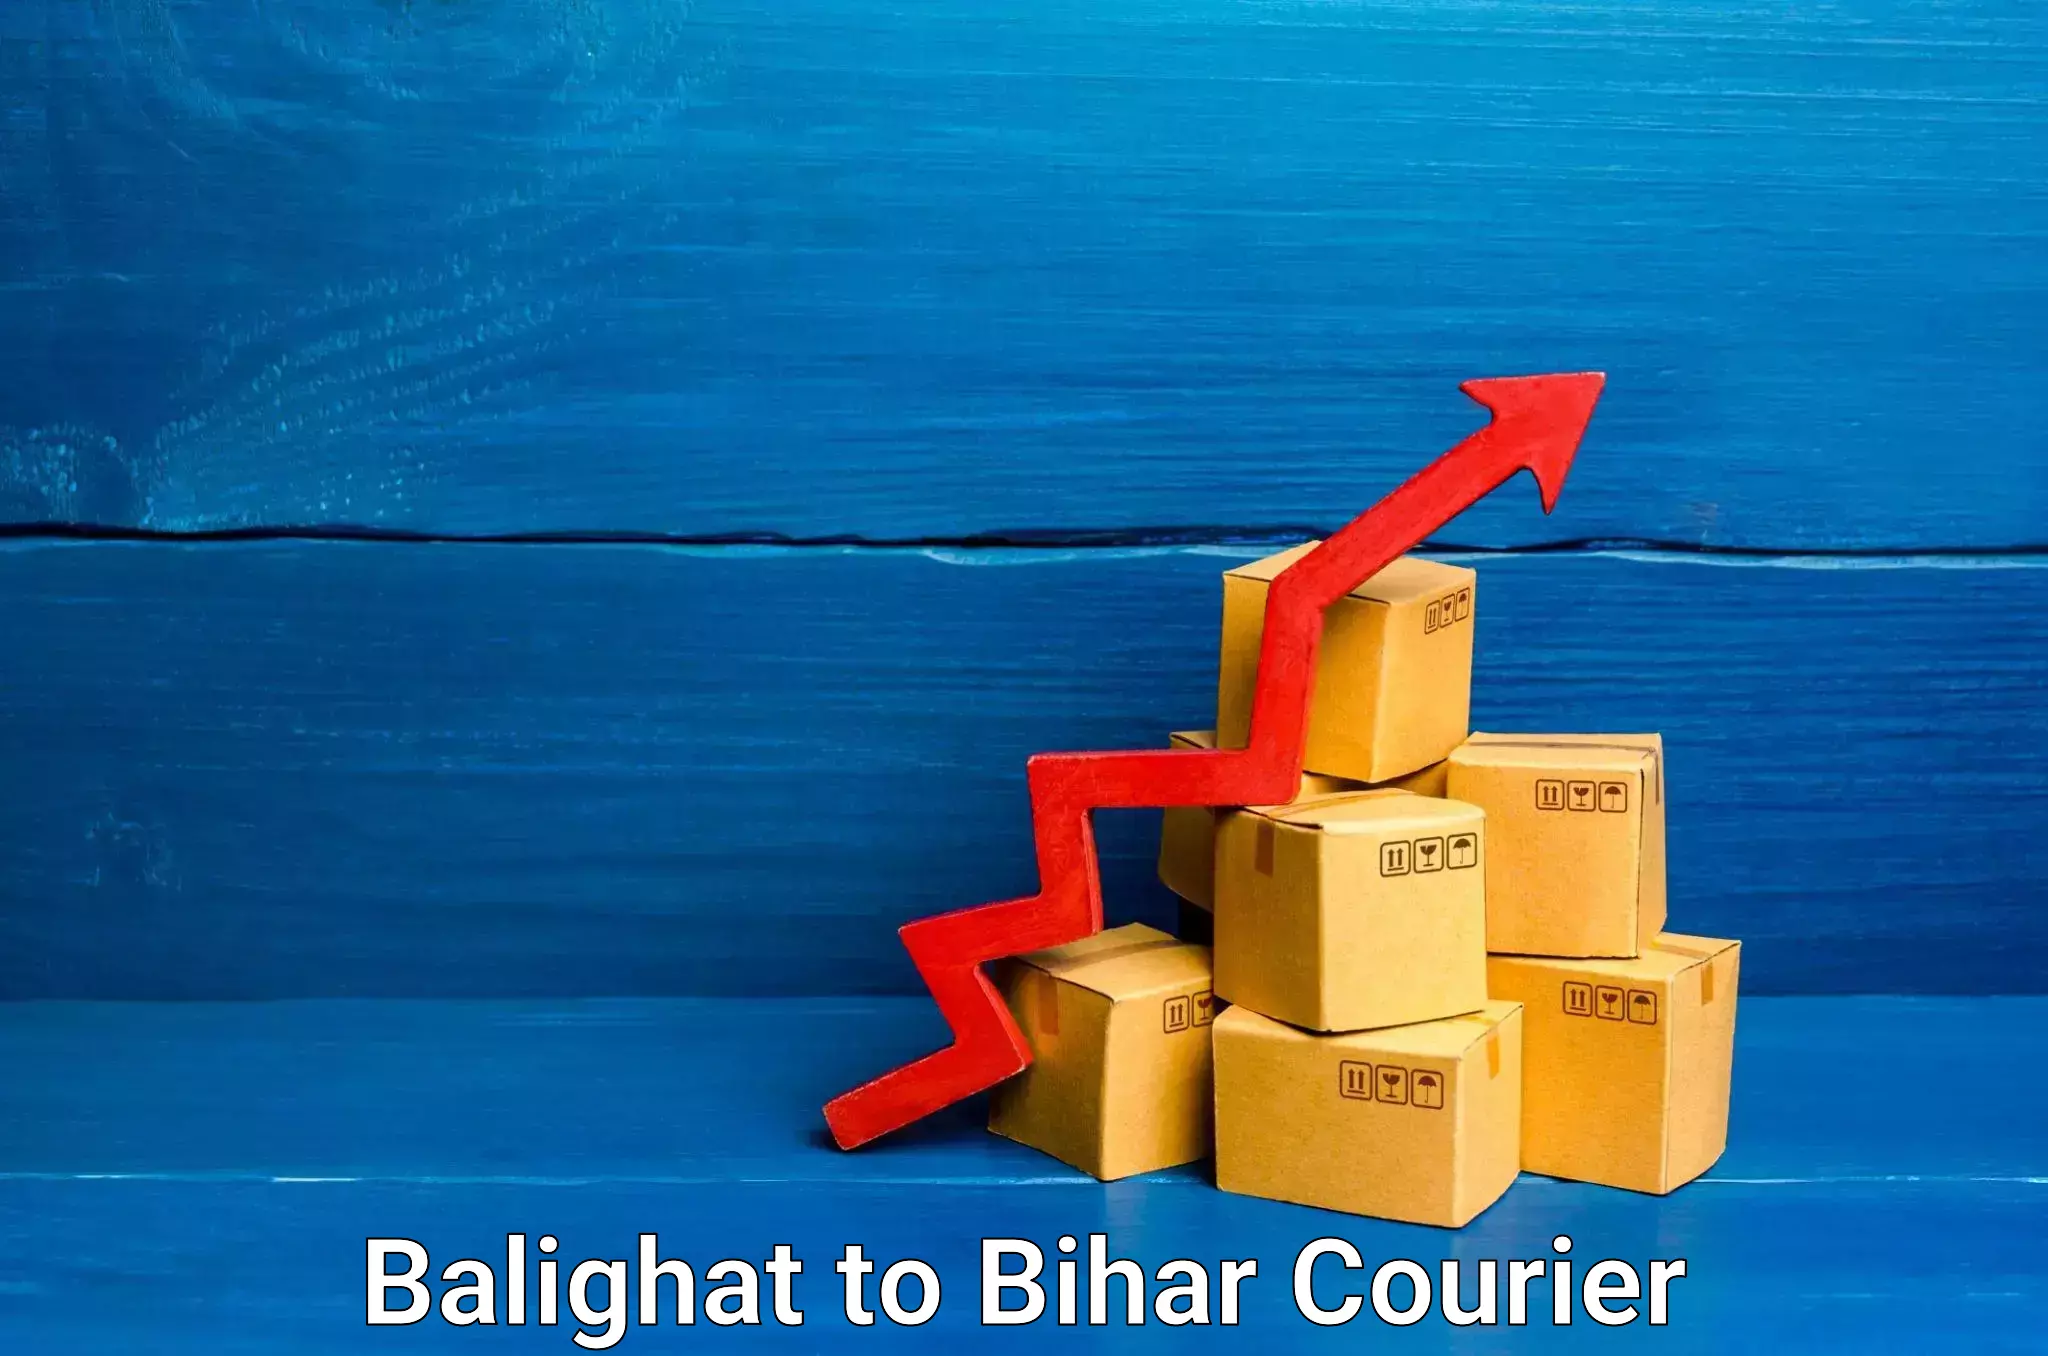 24-hour courier service in Balighat to Mashrakh